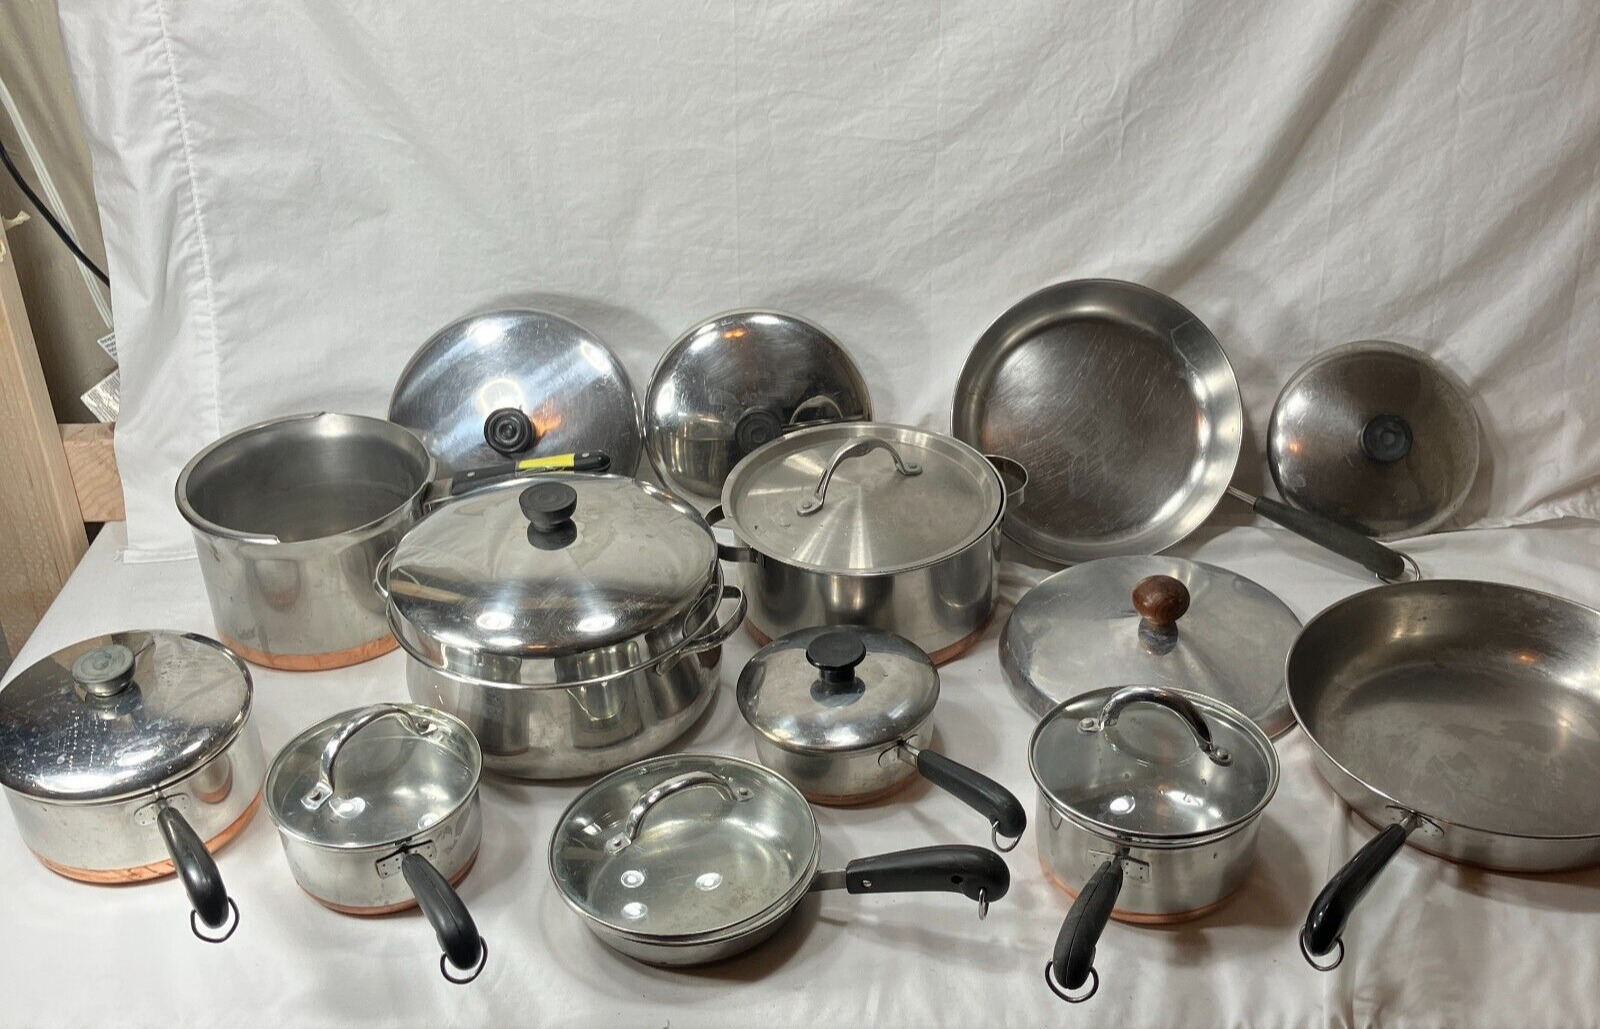 VINTAGE 1801 REVERE WARE STAINLESS COPPER BOTTOM COOKWARE - HUGE LOT 21 PIECES